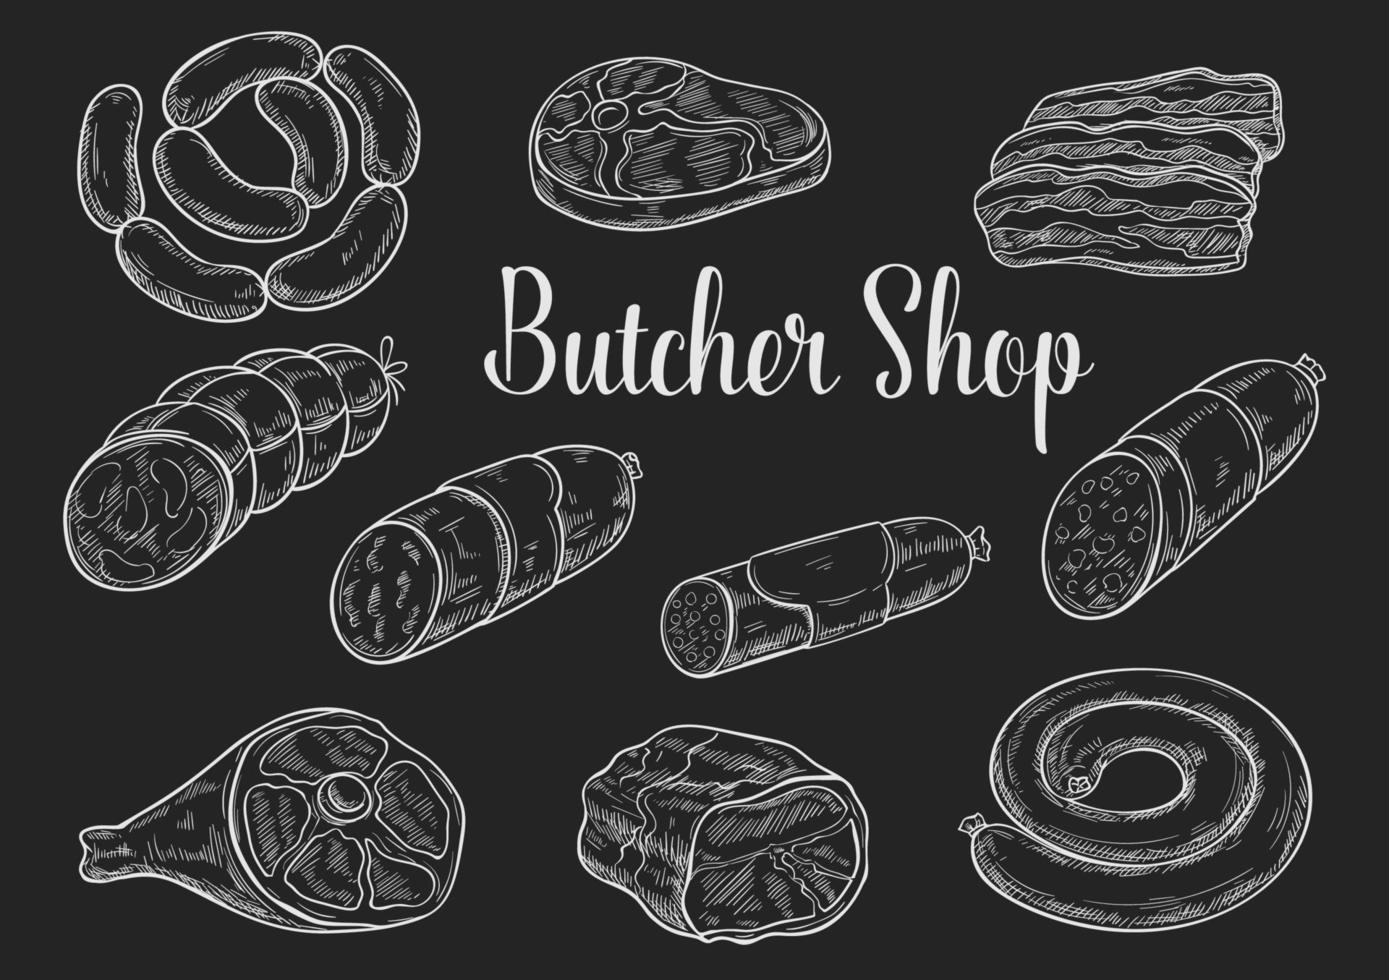 Meat and sausage chalk sketches on blackboard vector